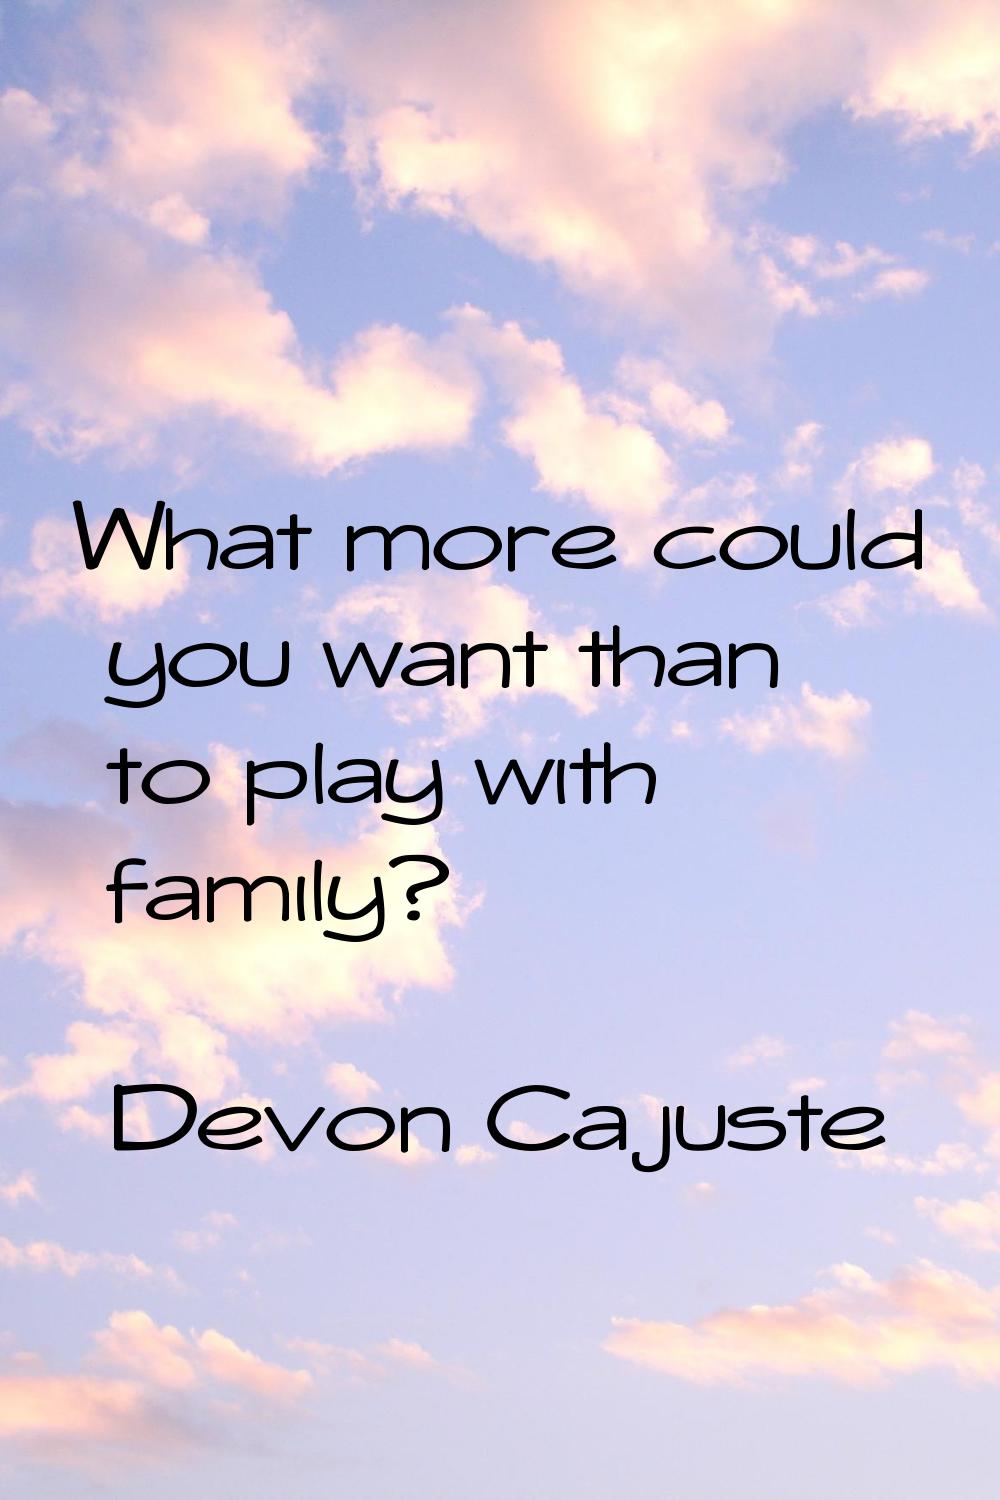 What more could you want than to play with family?